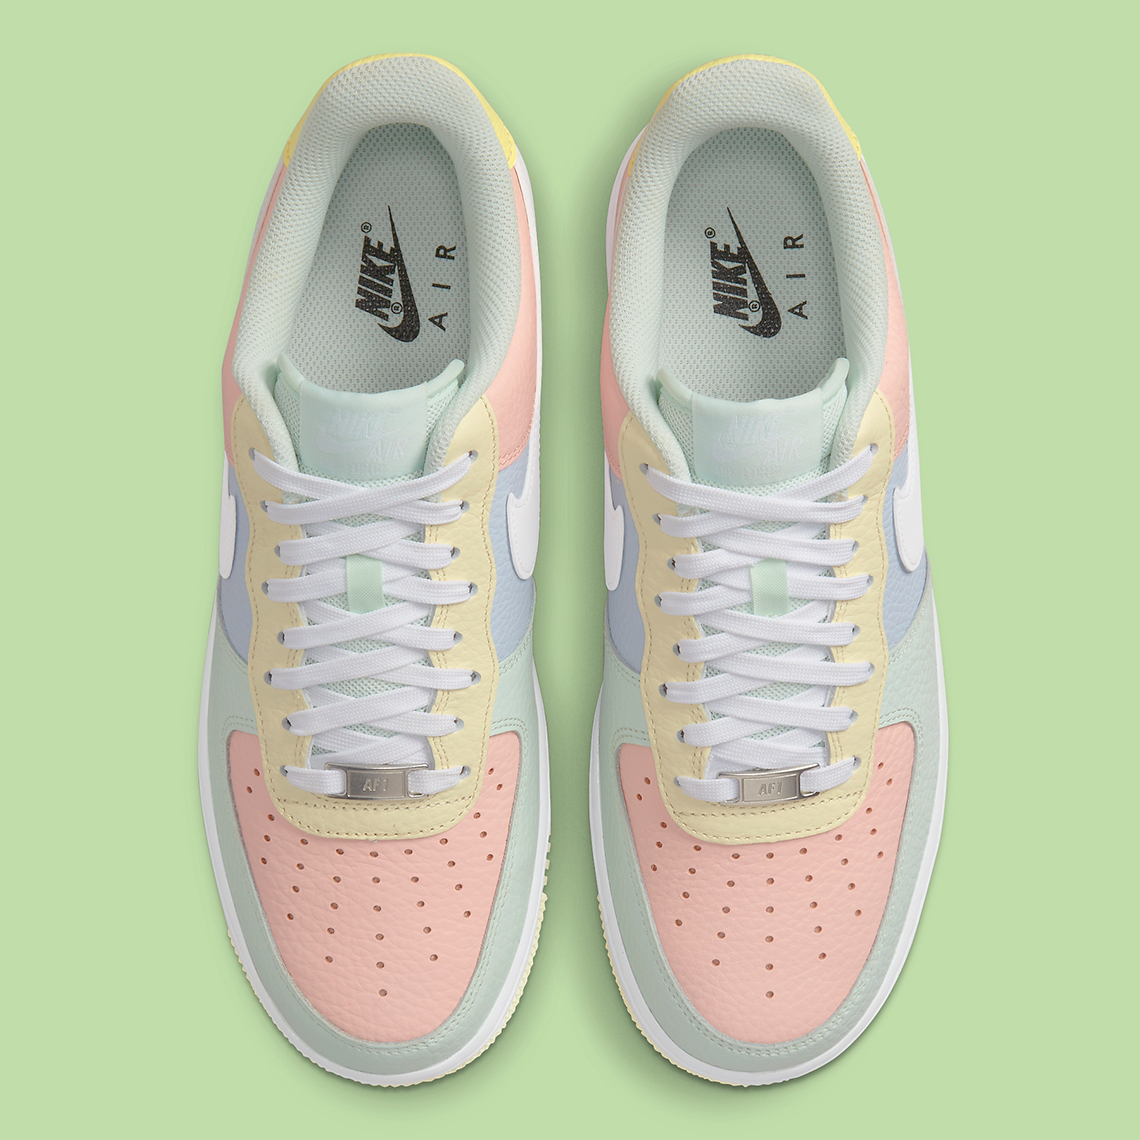 nike-air-force-1-low-easter-dr8590-600-release-date-5.jpg